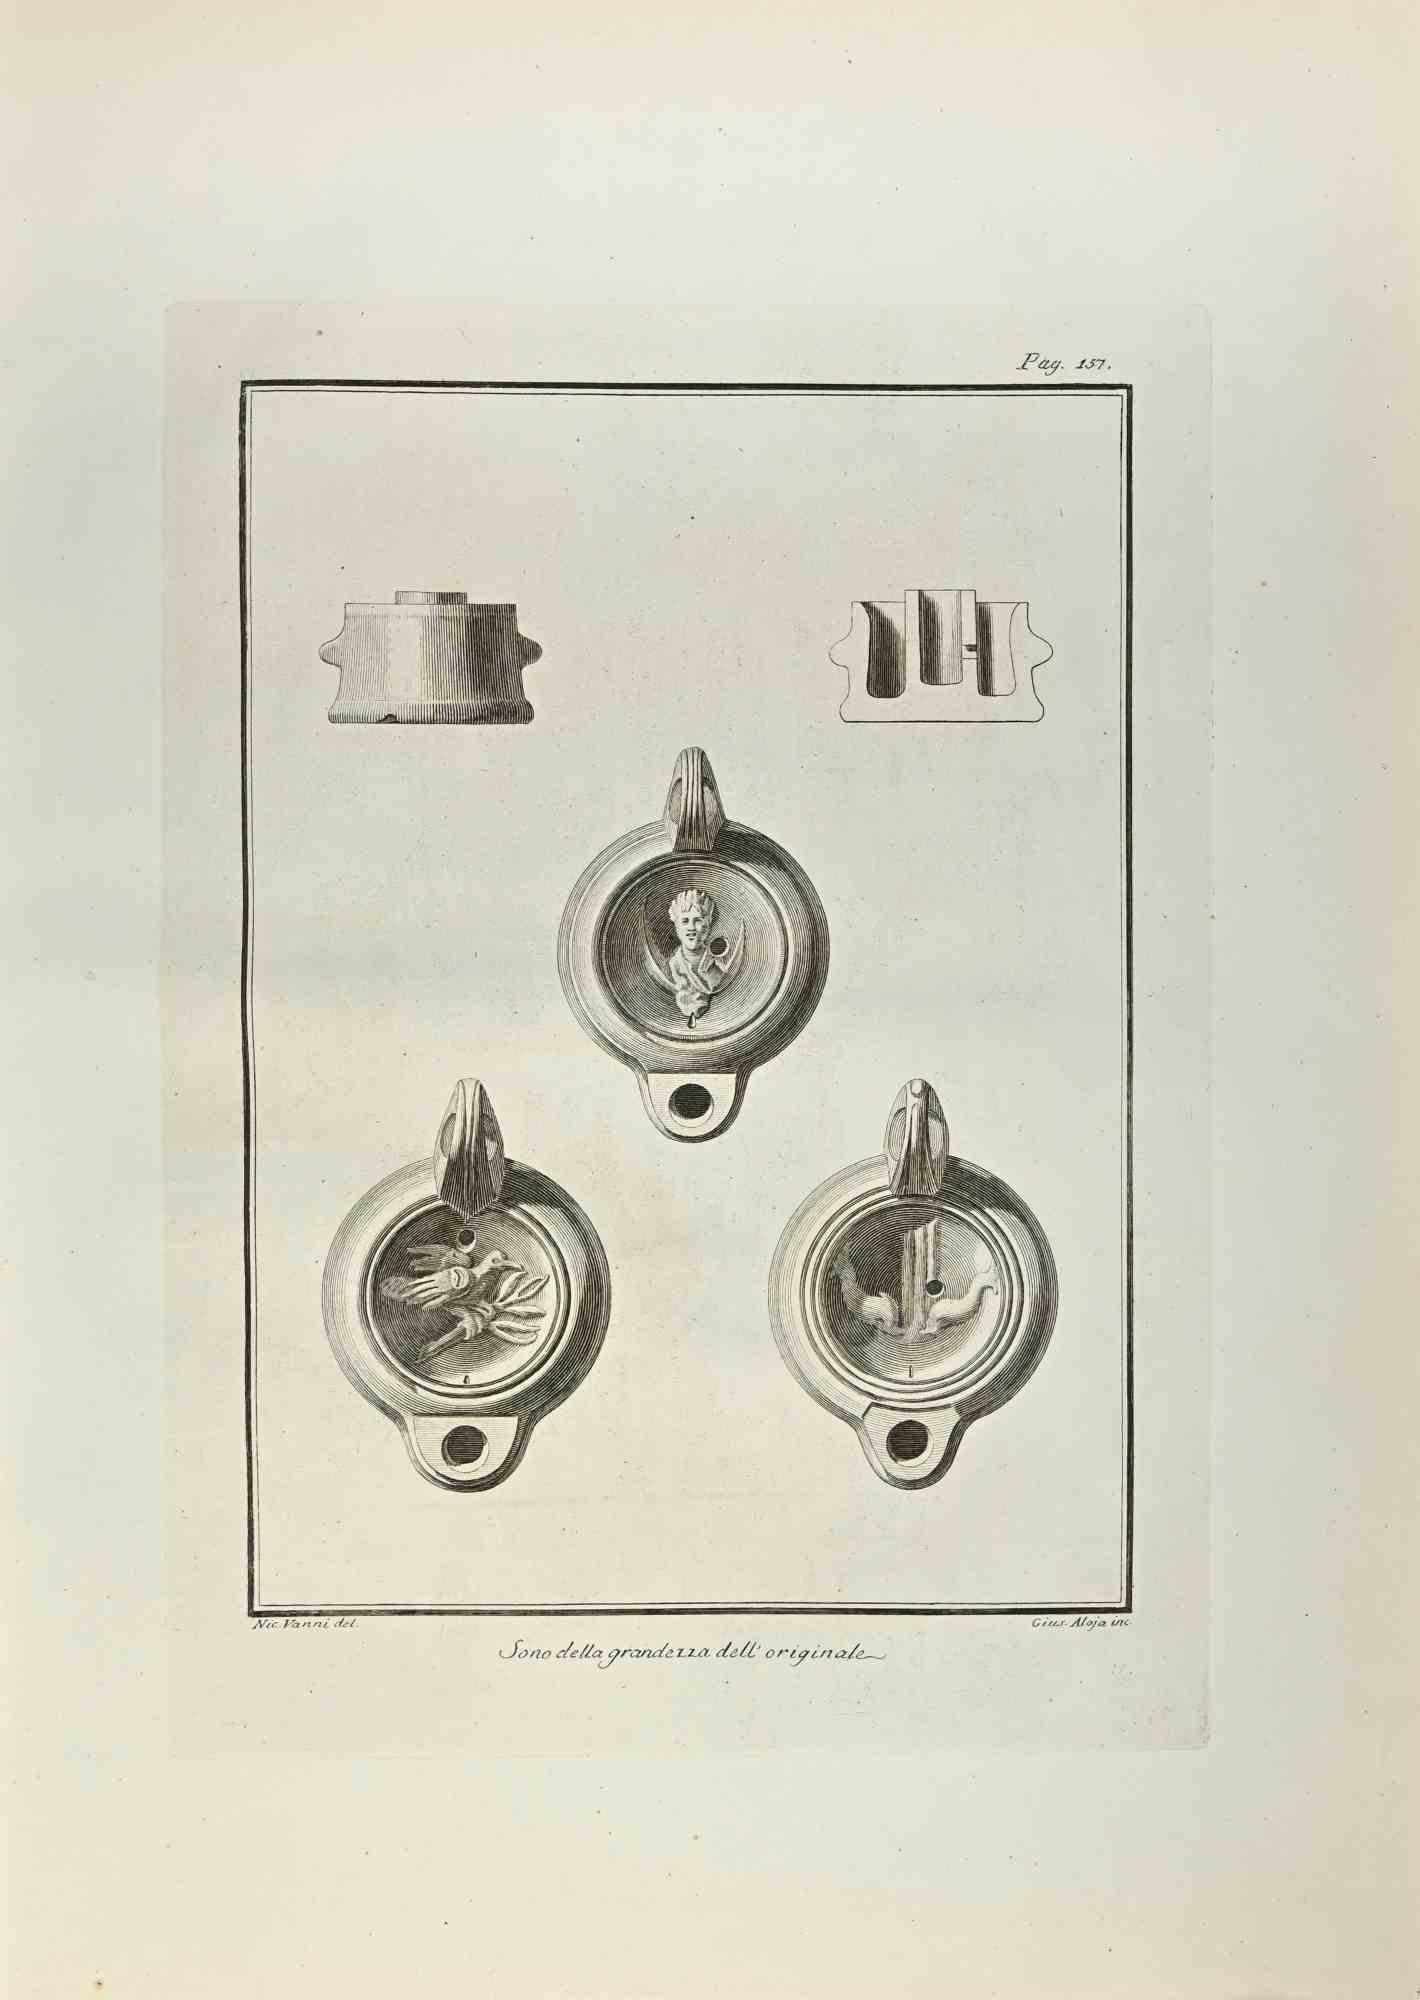 Oil Lamp With Bird and Caesar Bust from "Antiquities of Herculaneum" is an etching on paper realized by Giuseppe Aloja in the 18th Century.

Signed on the plate.

Good conditions with some foxing, a small missing piece of paper at the top left